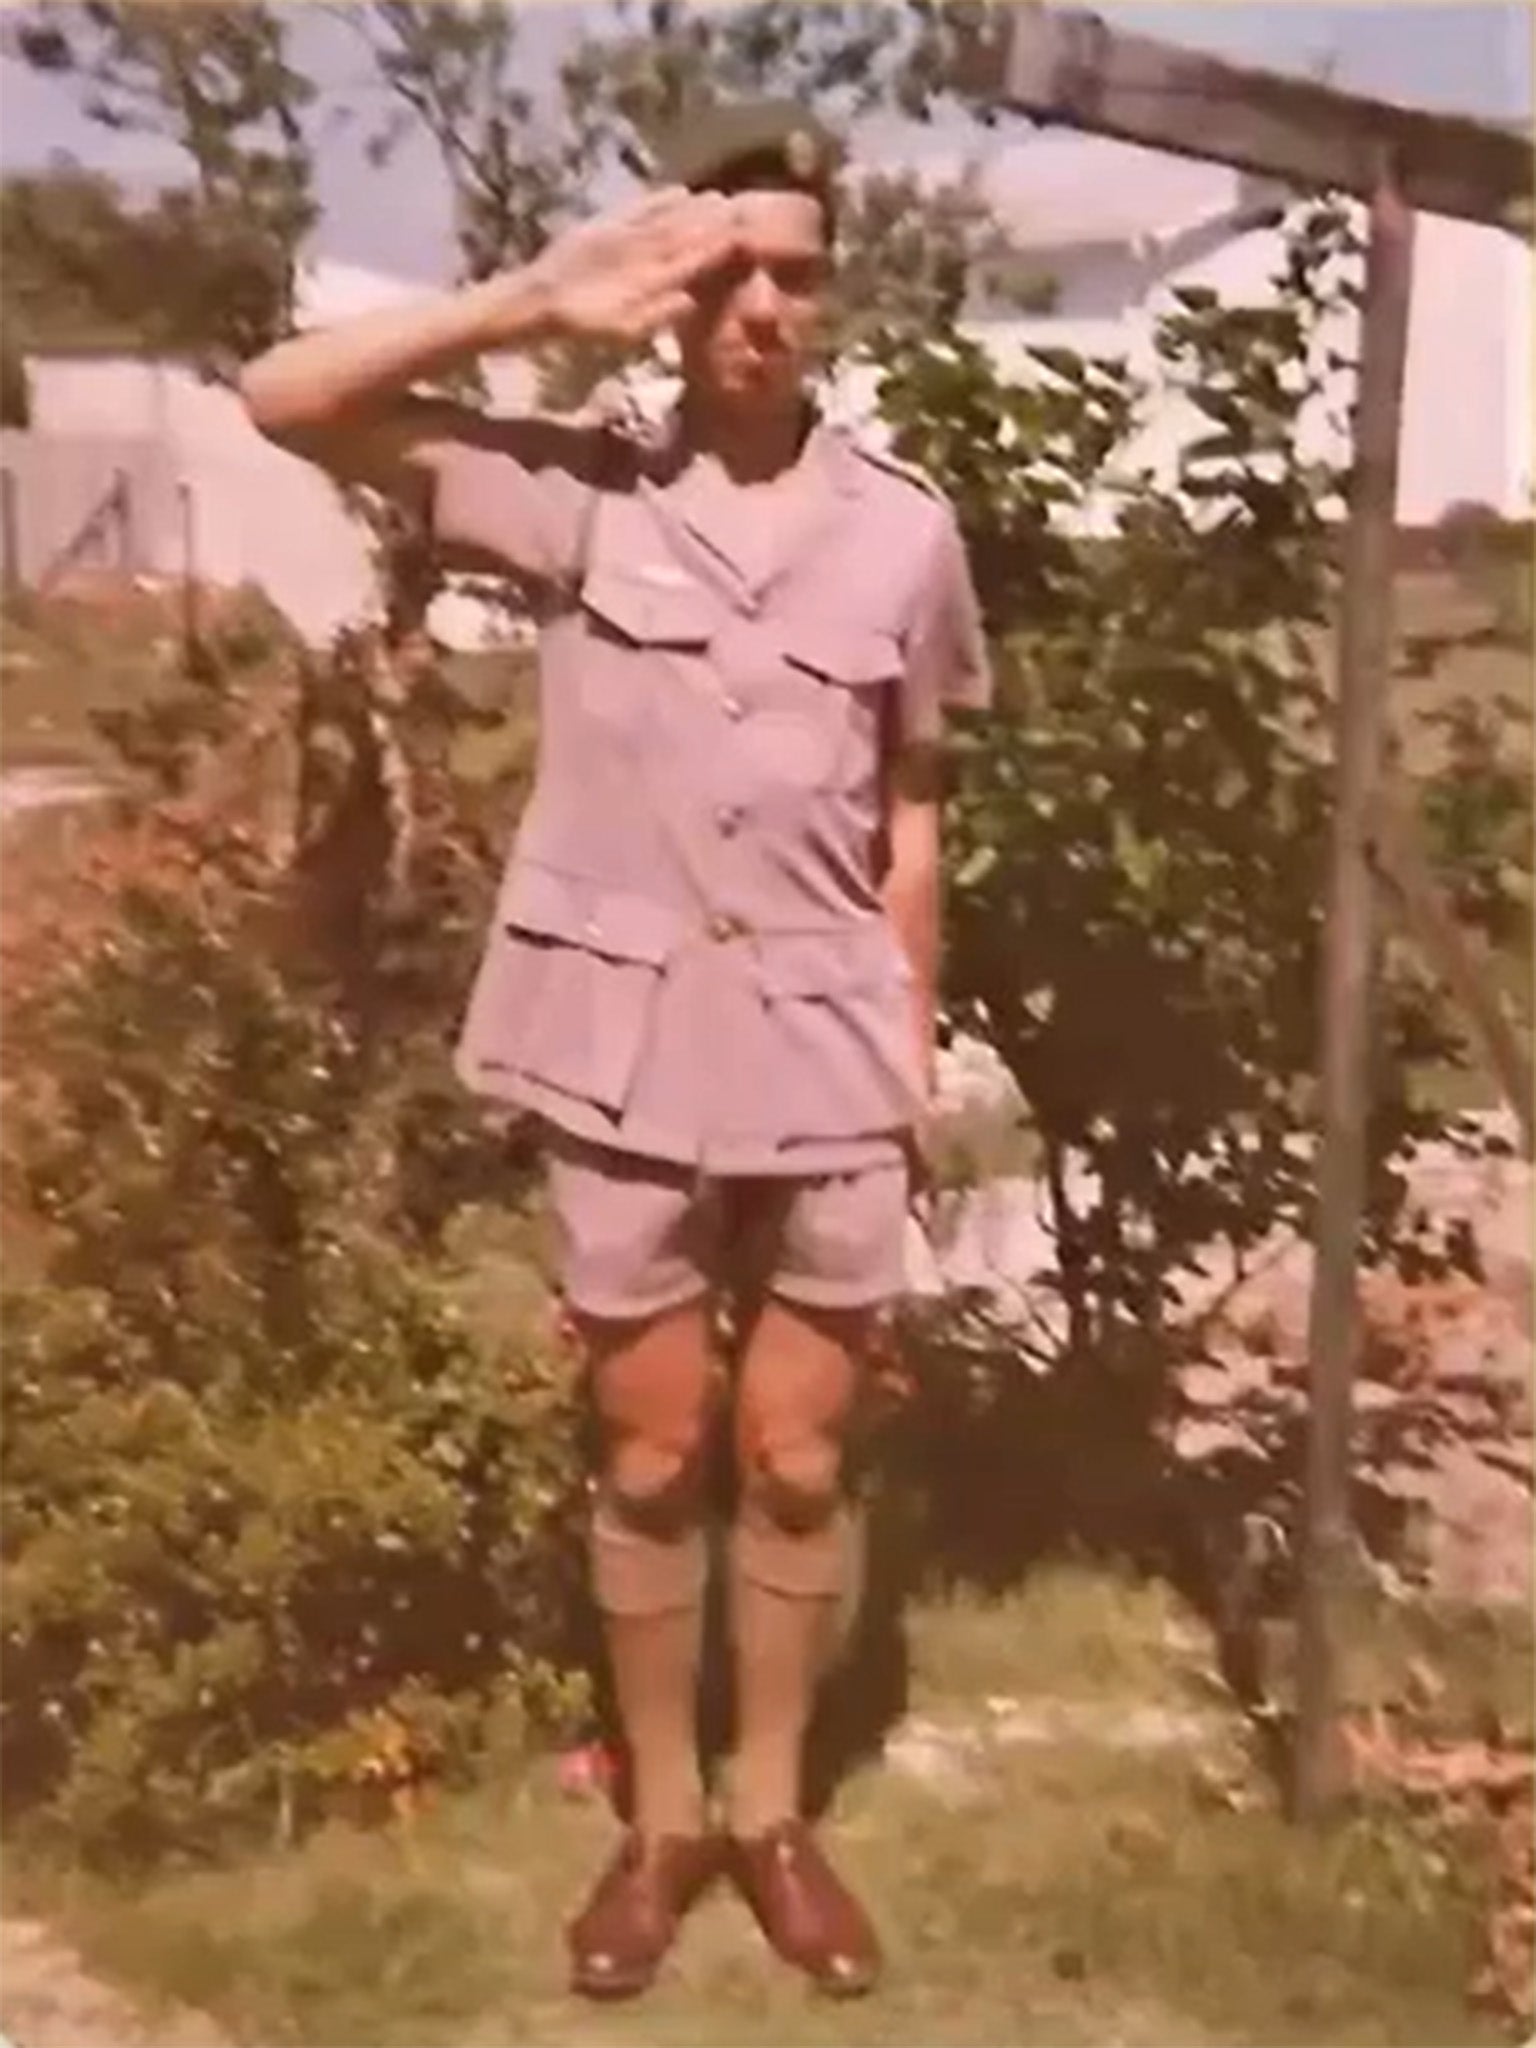 Brand after finishing his prison officer training in 1978